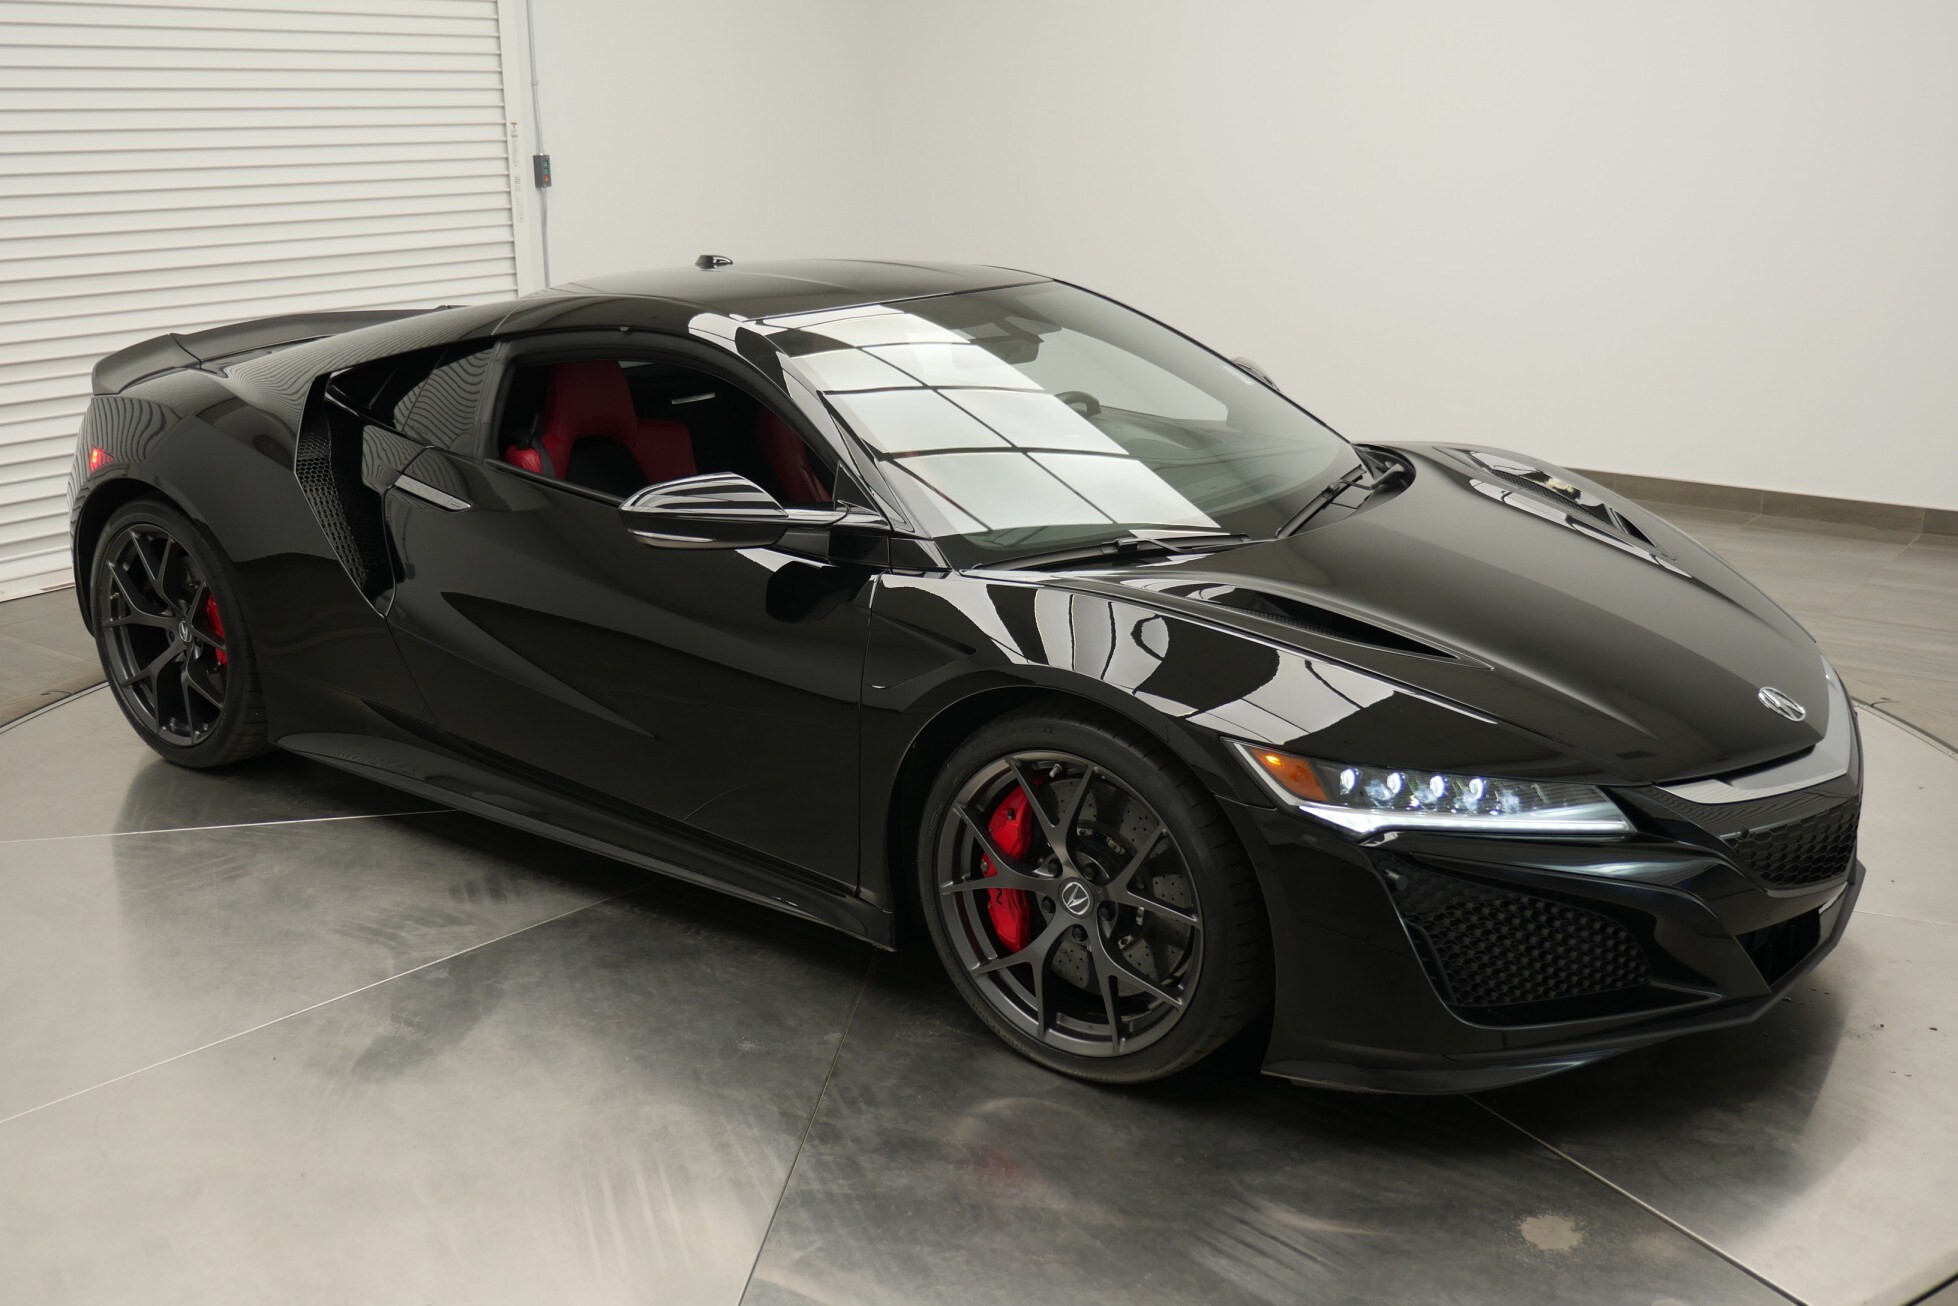 previously sold used car Acura NSX 2017